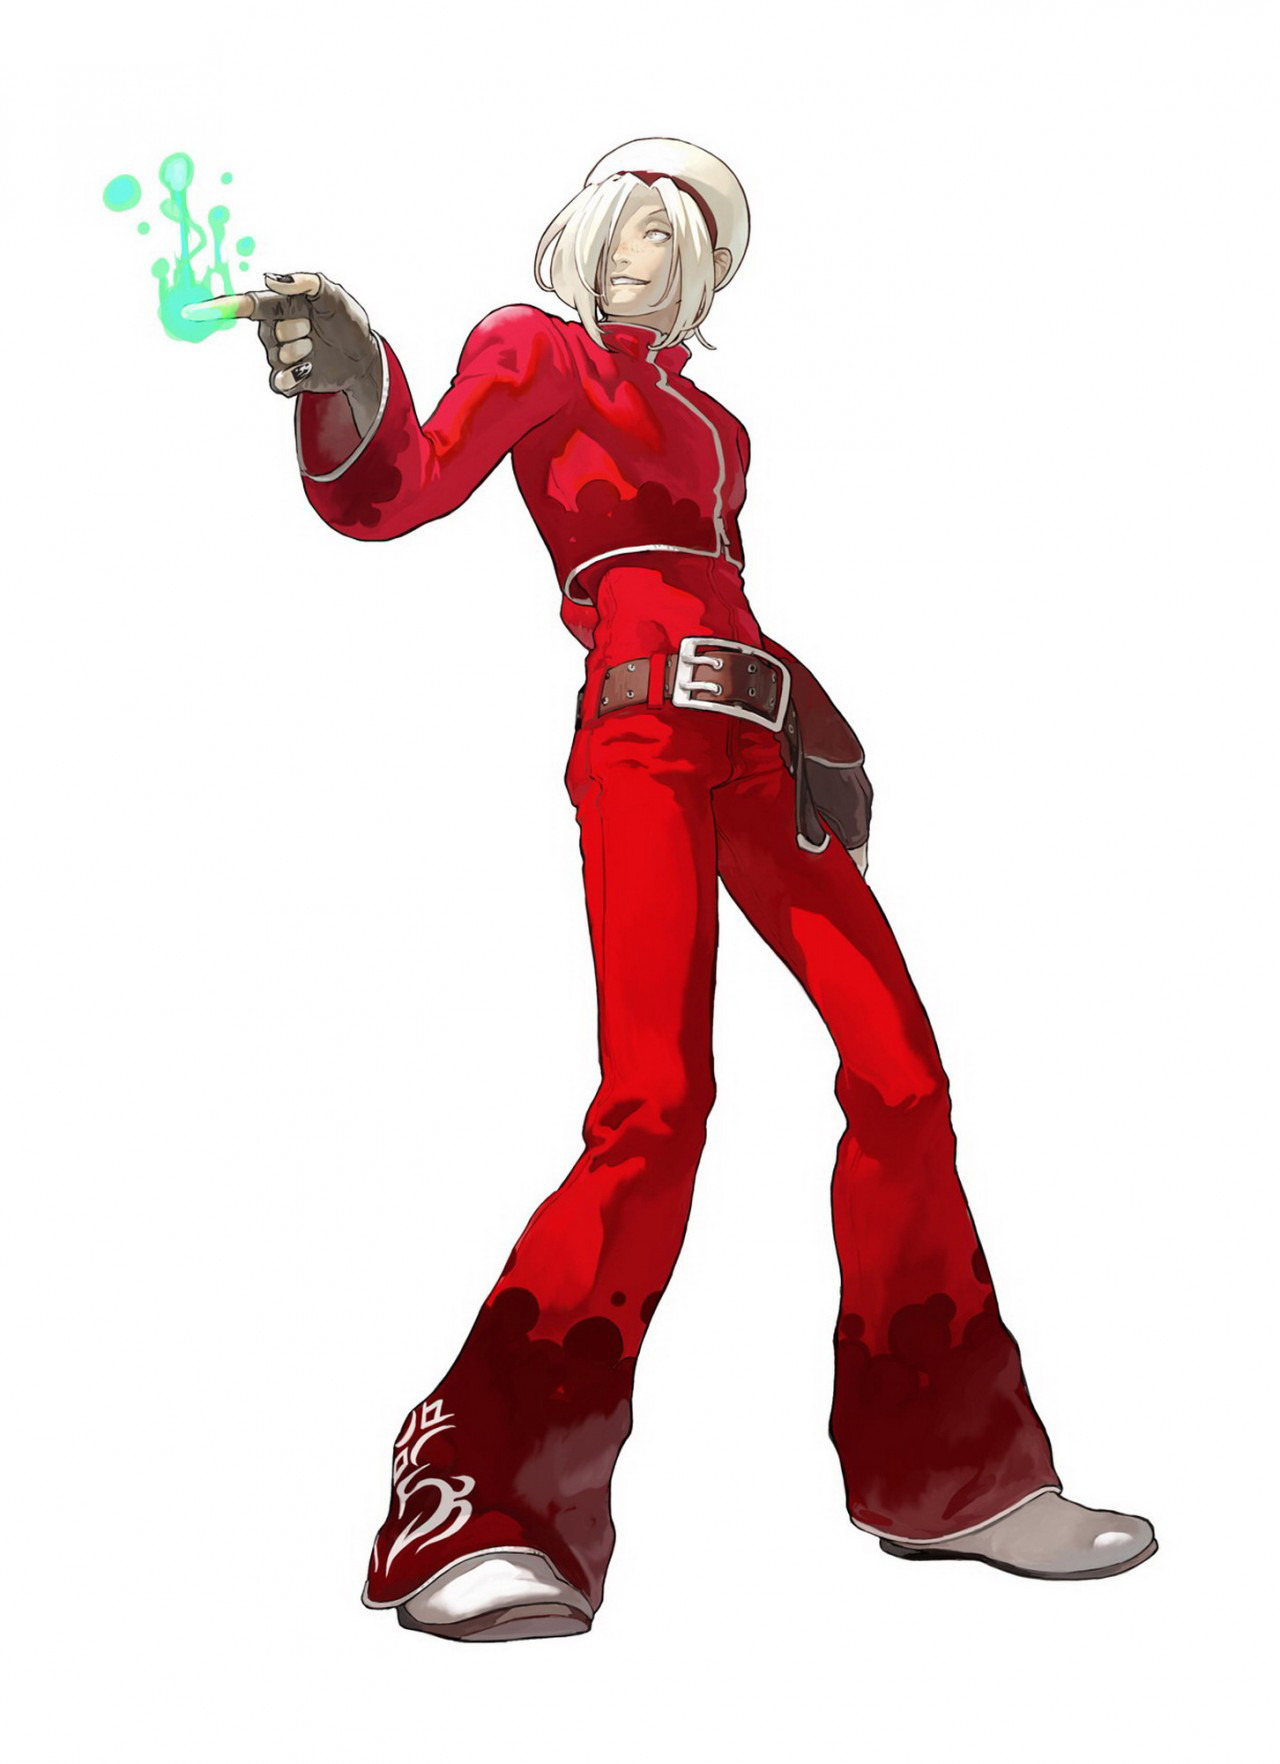 King of Fighters XIII - Official Character Art.